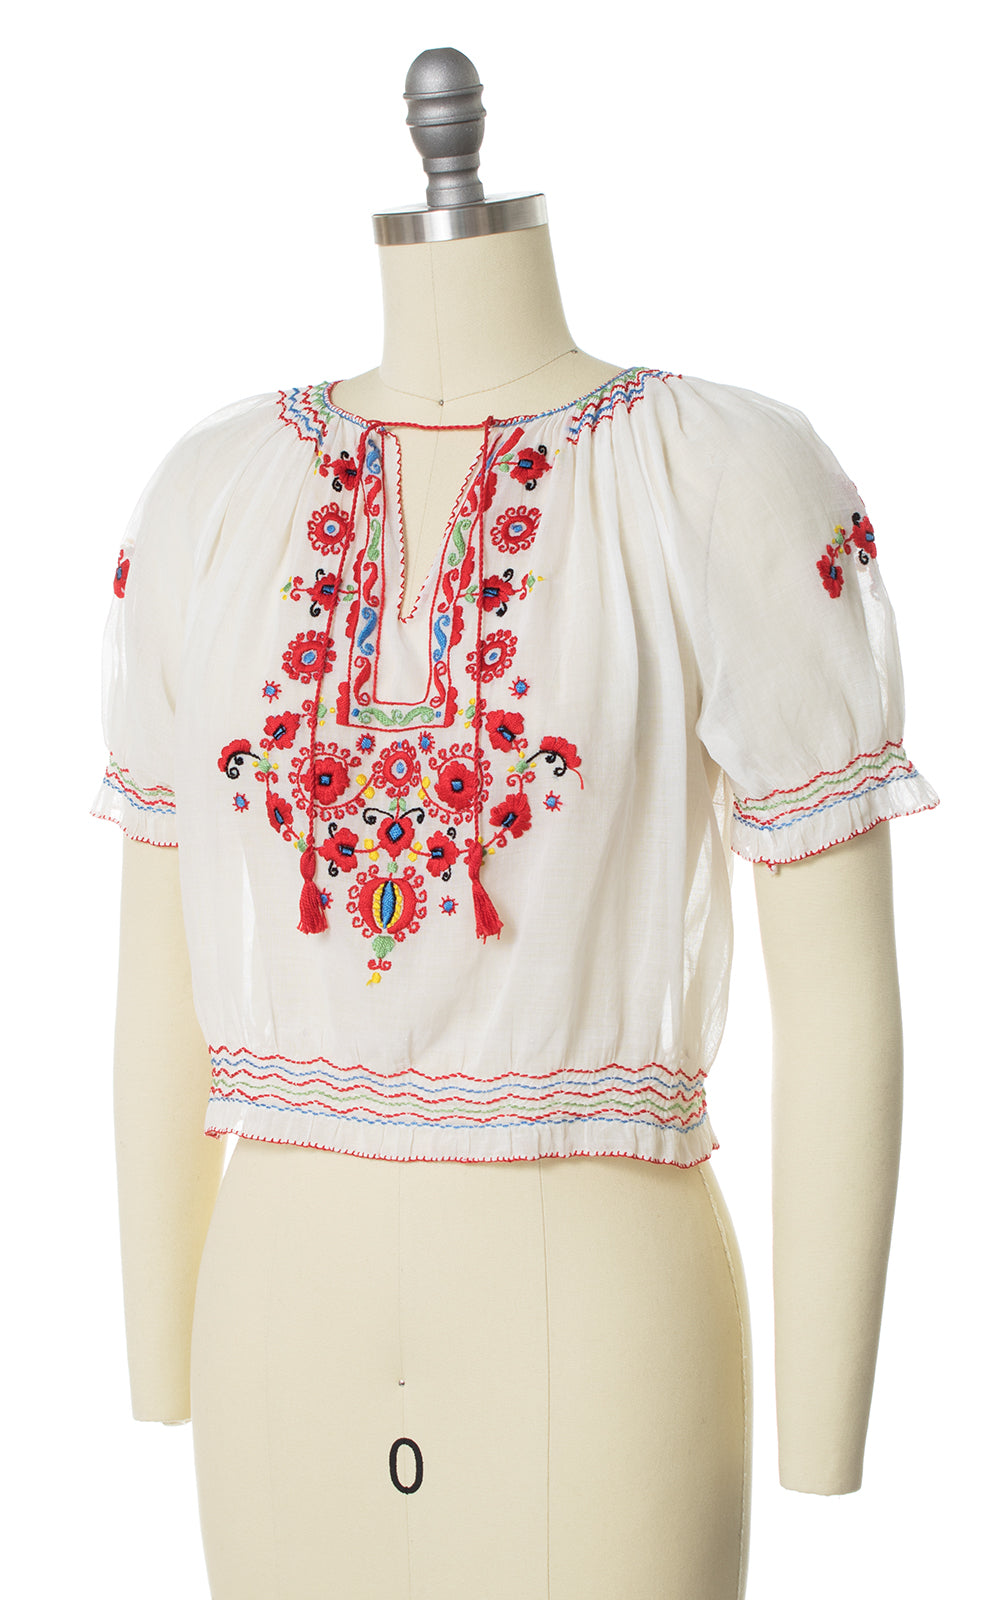 1970s Floral Embroidered Sheer Peasant Top